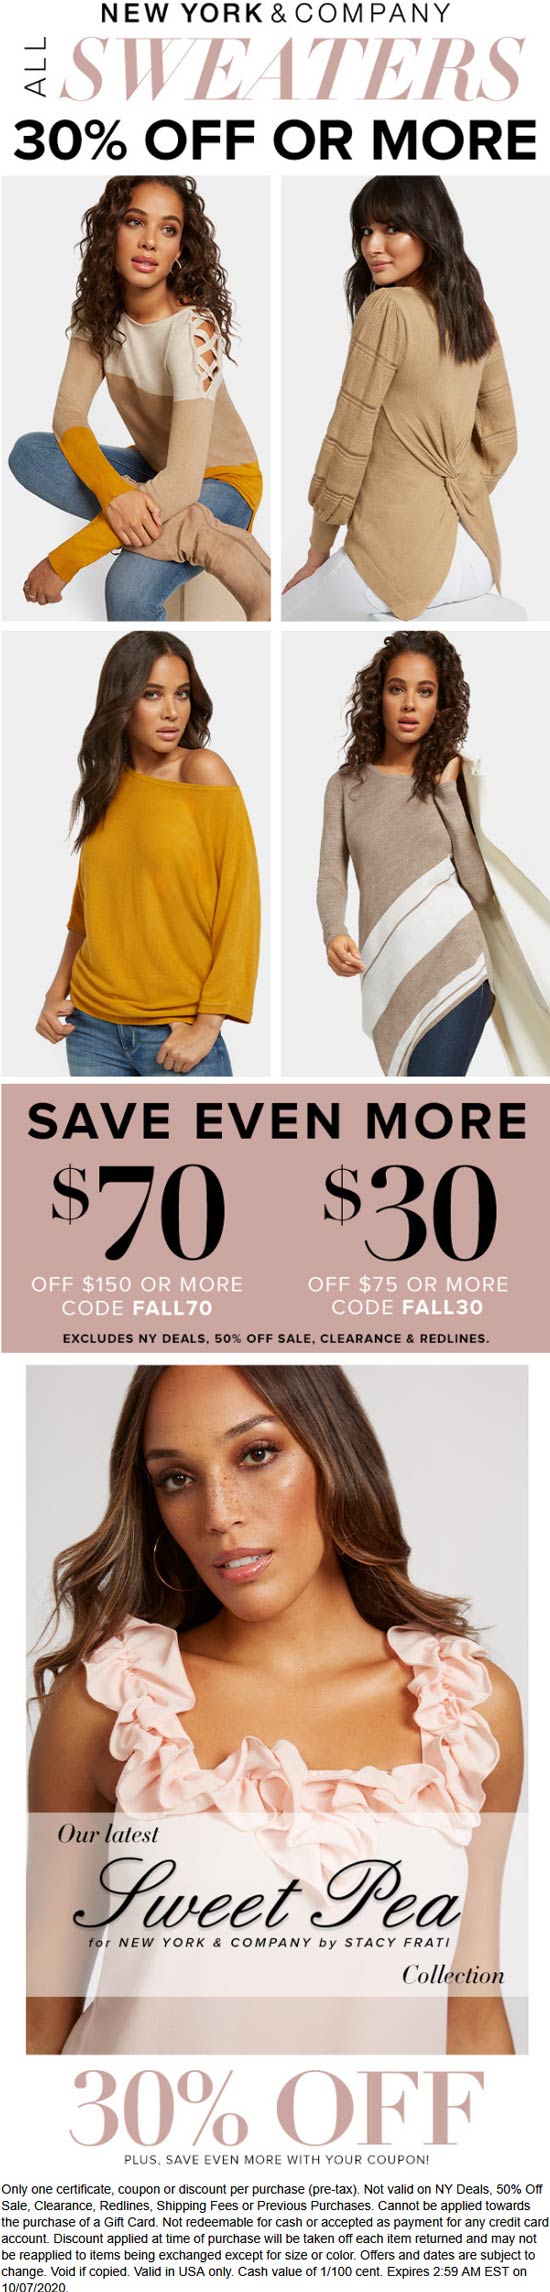 New York & Company stores Coupon  $30 off $75 & more today at New York & Company, or online via promo code FALL30 and FALL70 #newyorkcompany 